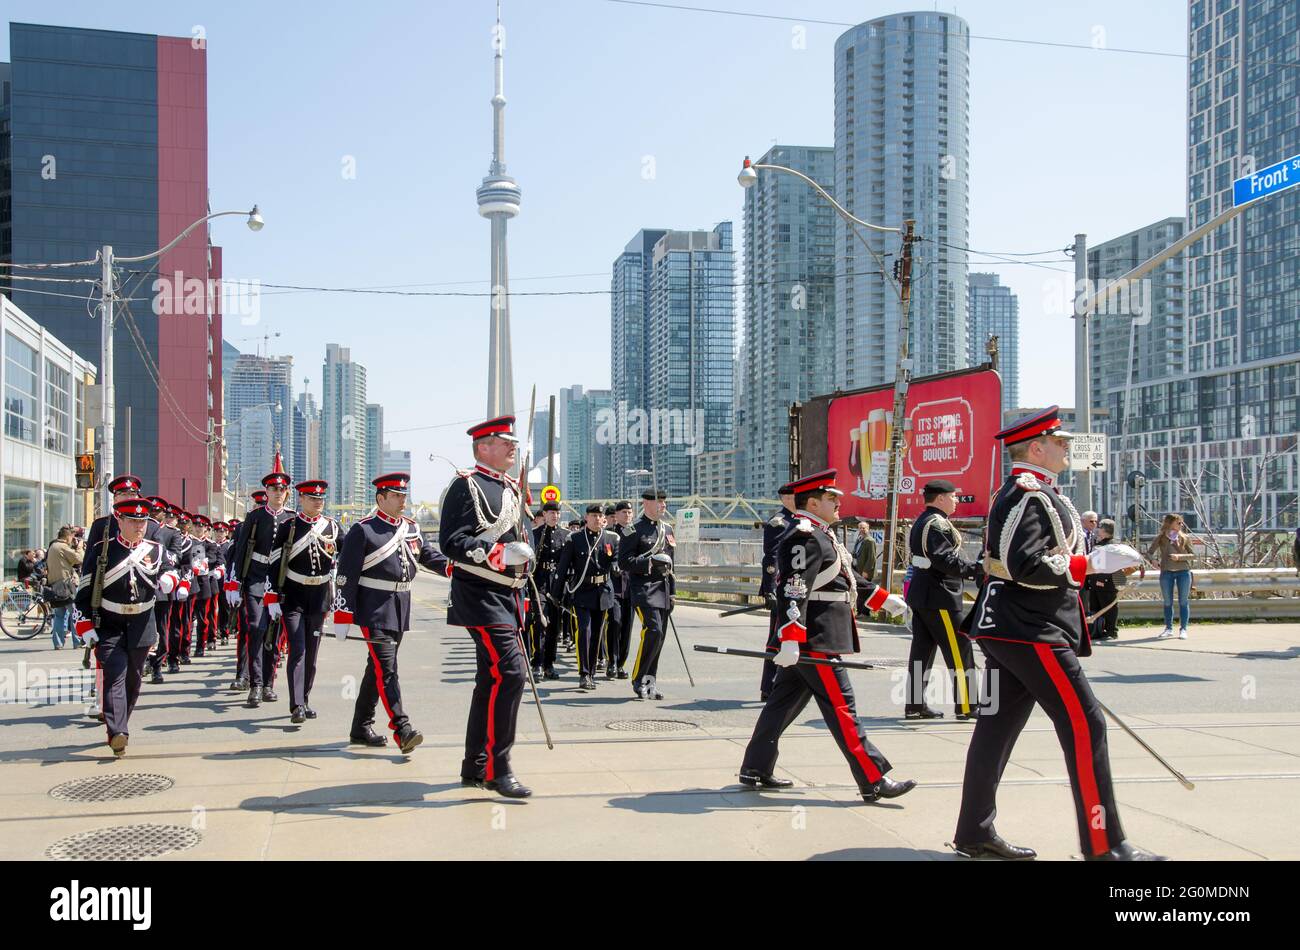 Military Parade while the City of Toronto and the Canadian Armed Forces (CAF) commemorate the 200th anniversary of the Battle of York. Details of the Stock Photo